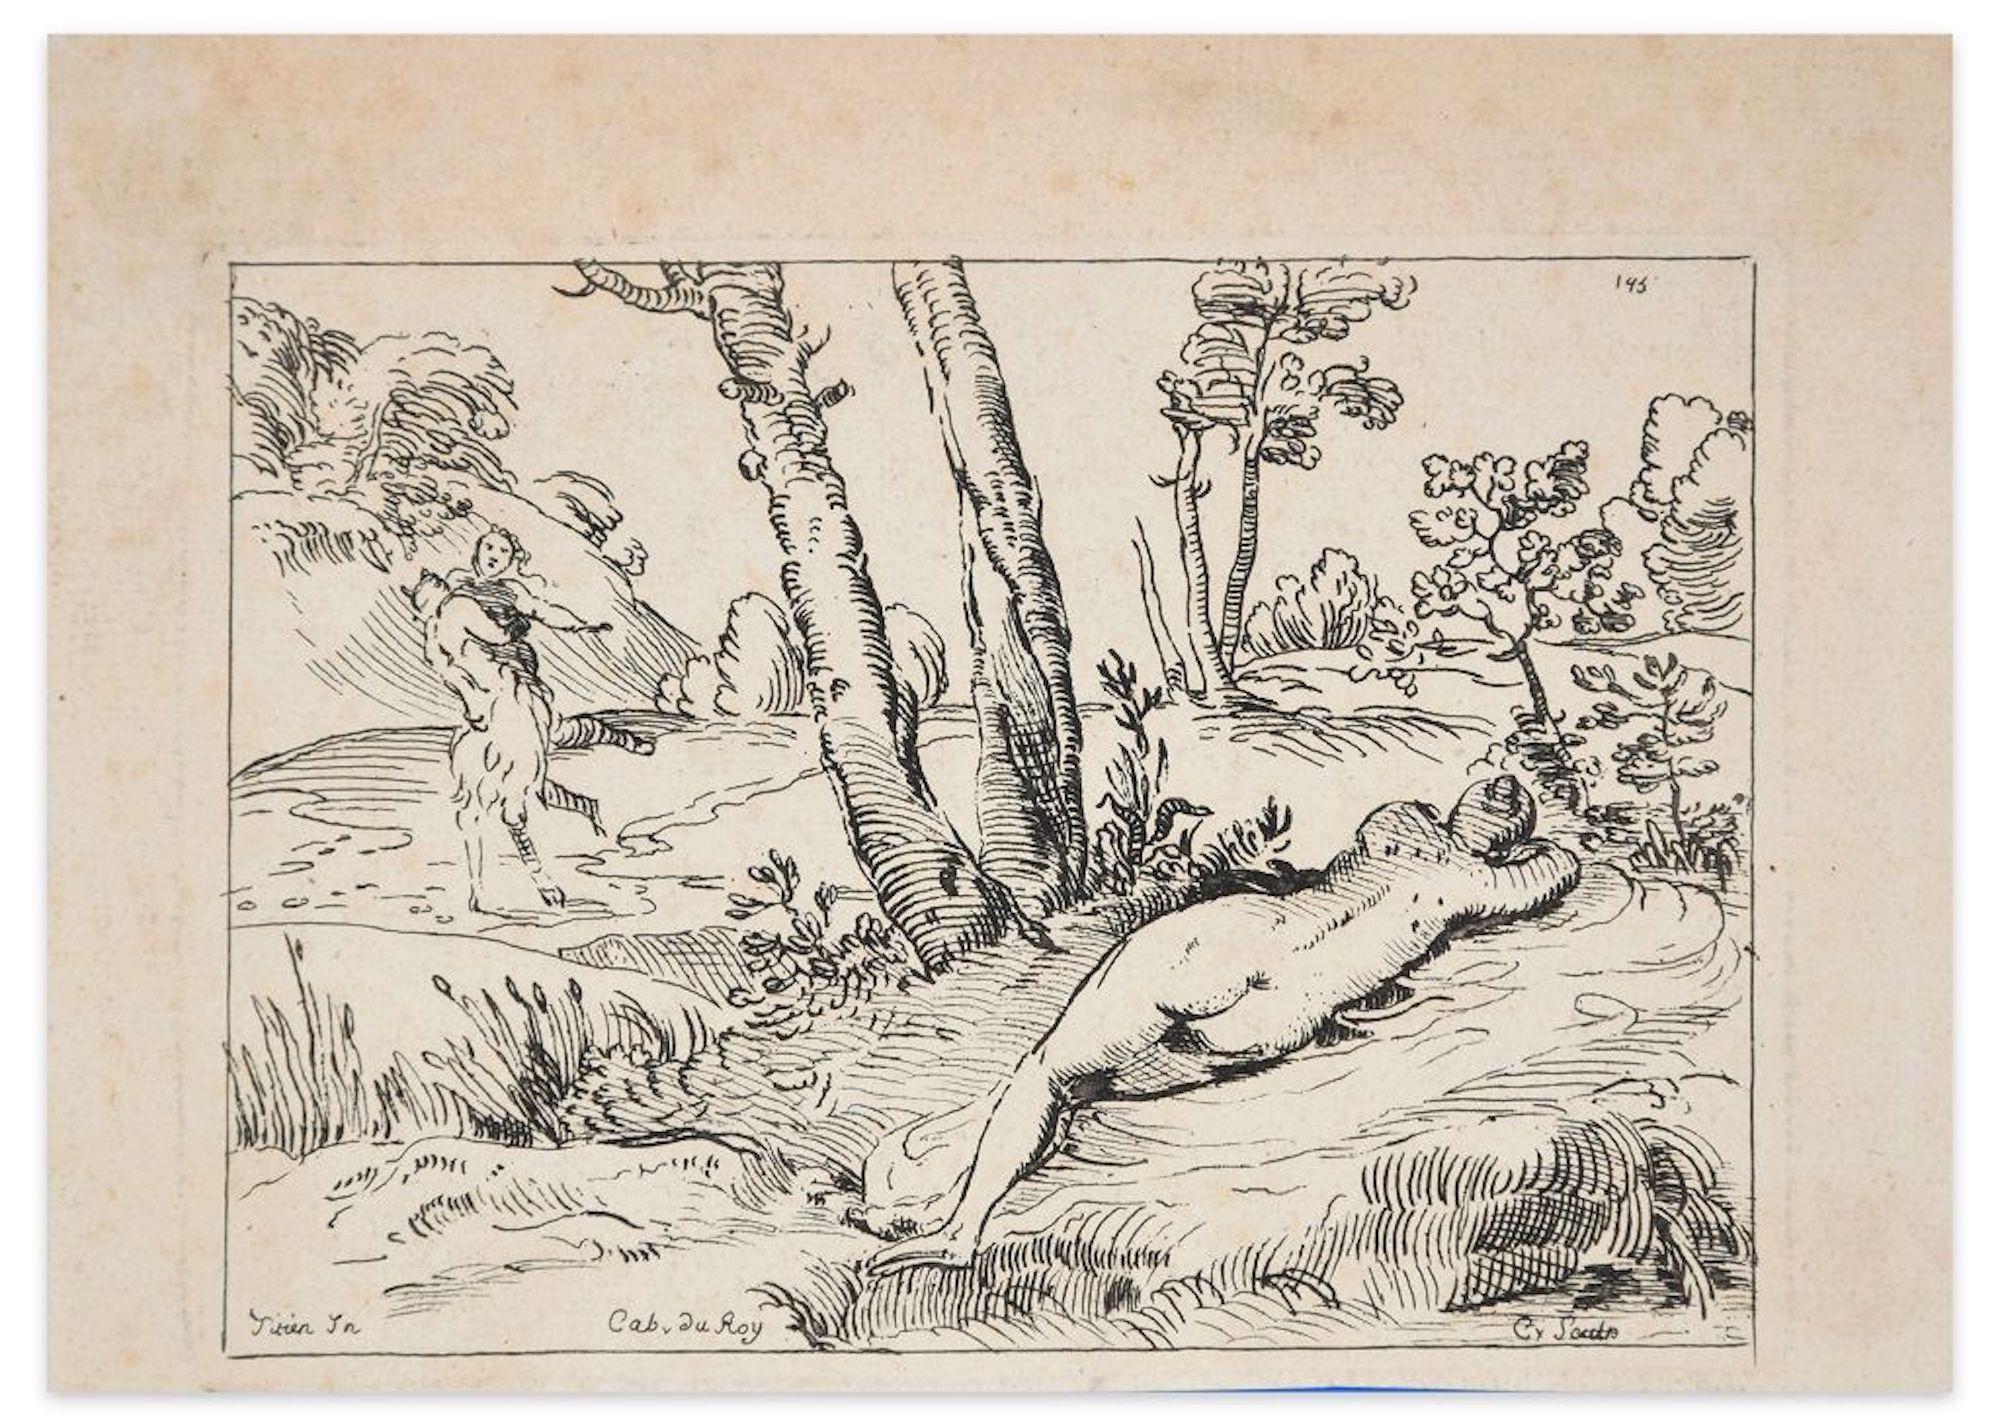 Anne Claude Philippe de Tubières Figurative Print - Sleeping Nymph - Original Etching After Titian - Early 18th Century